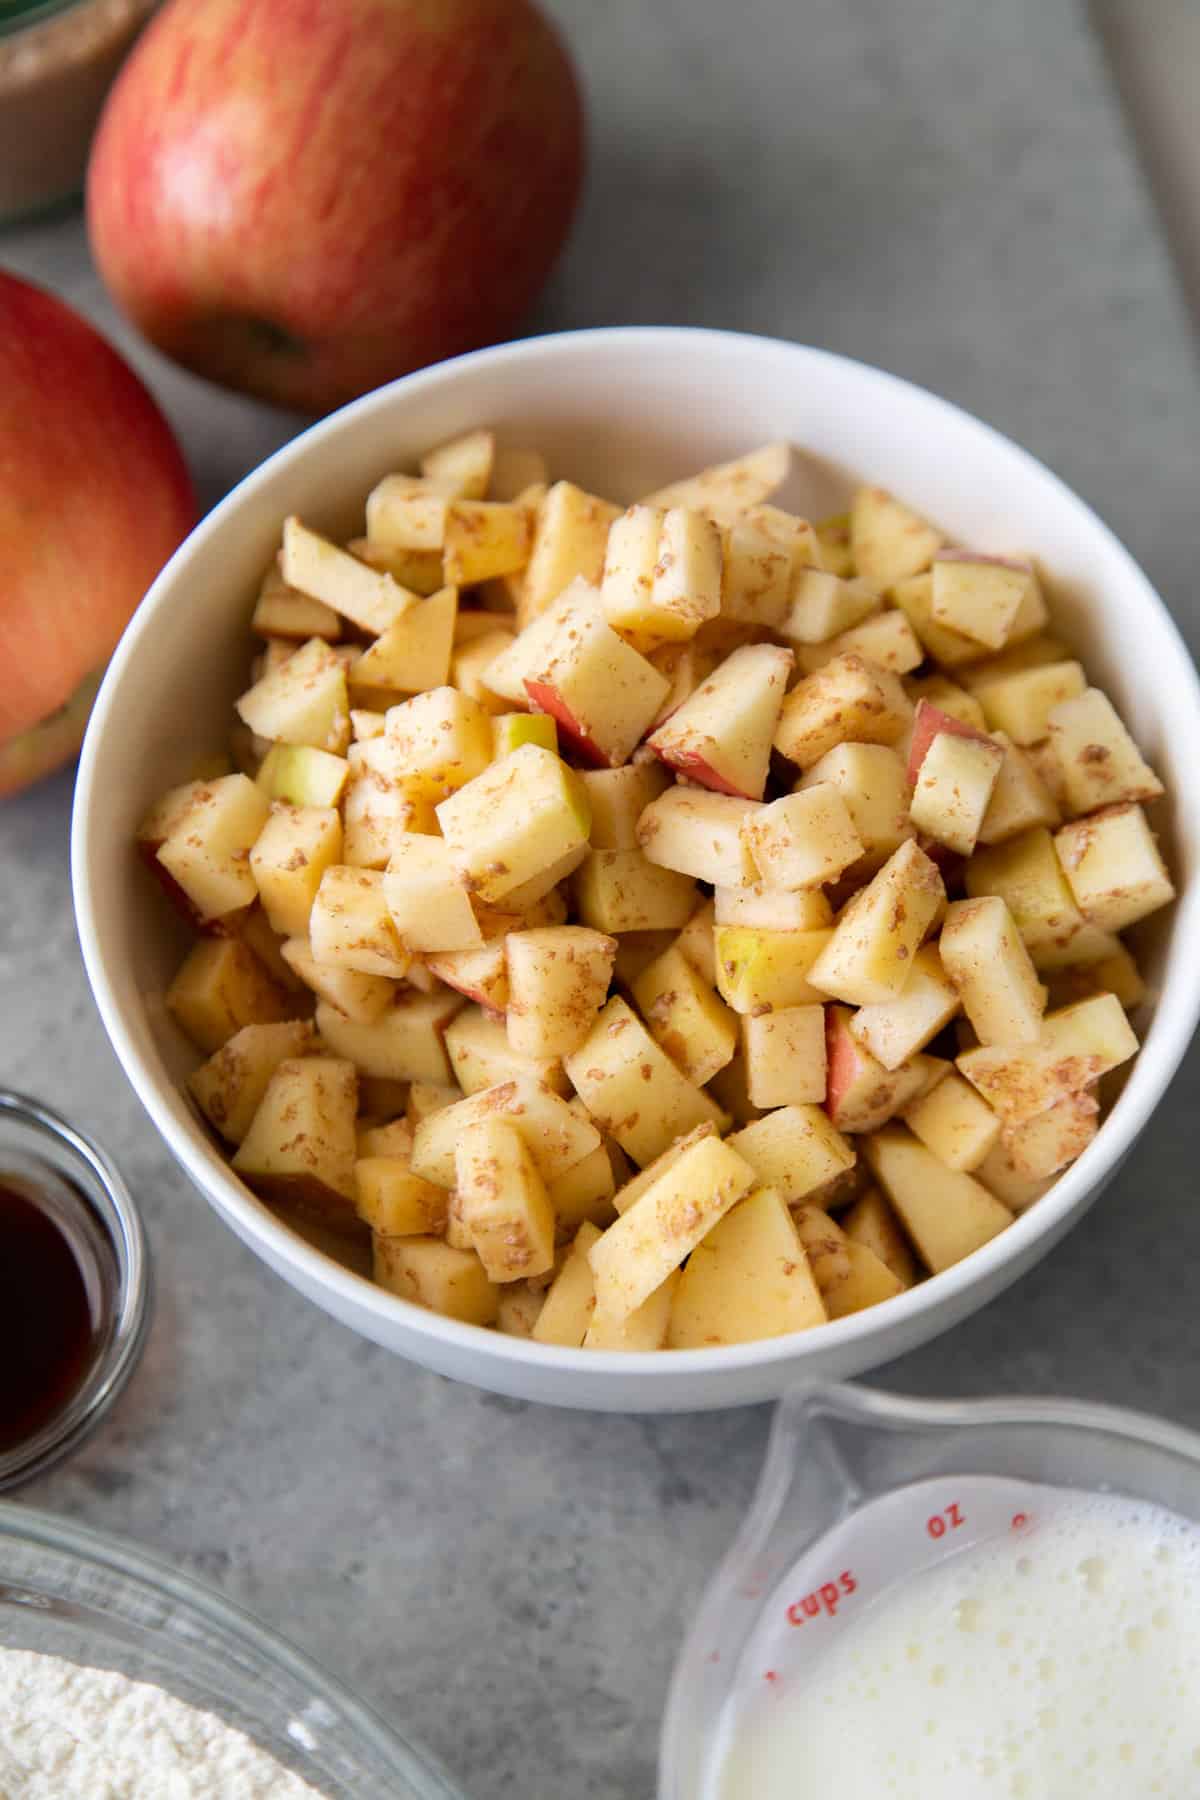 diced Fuji apples tossed in flour and ground cinnamon